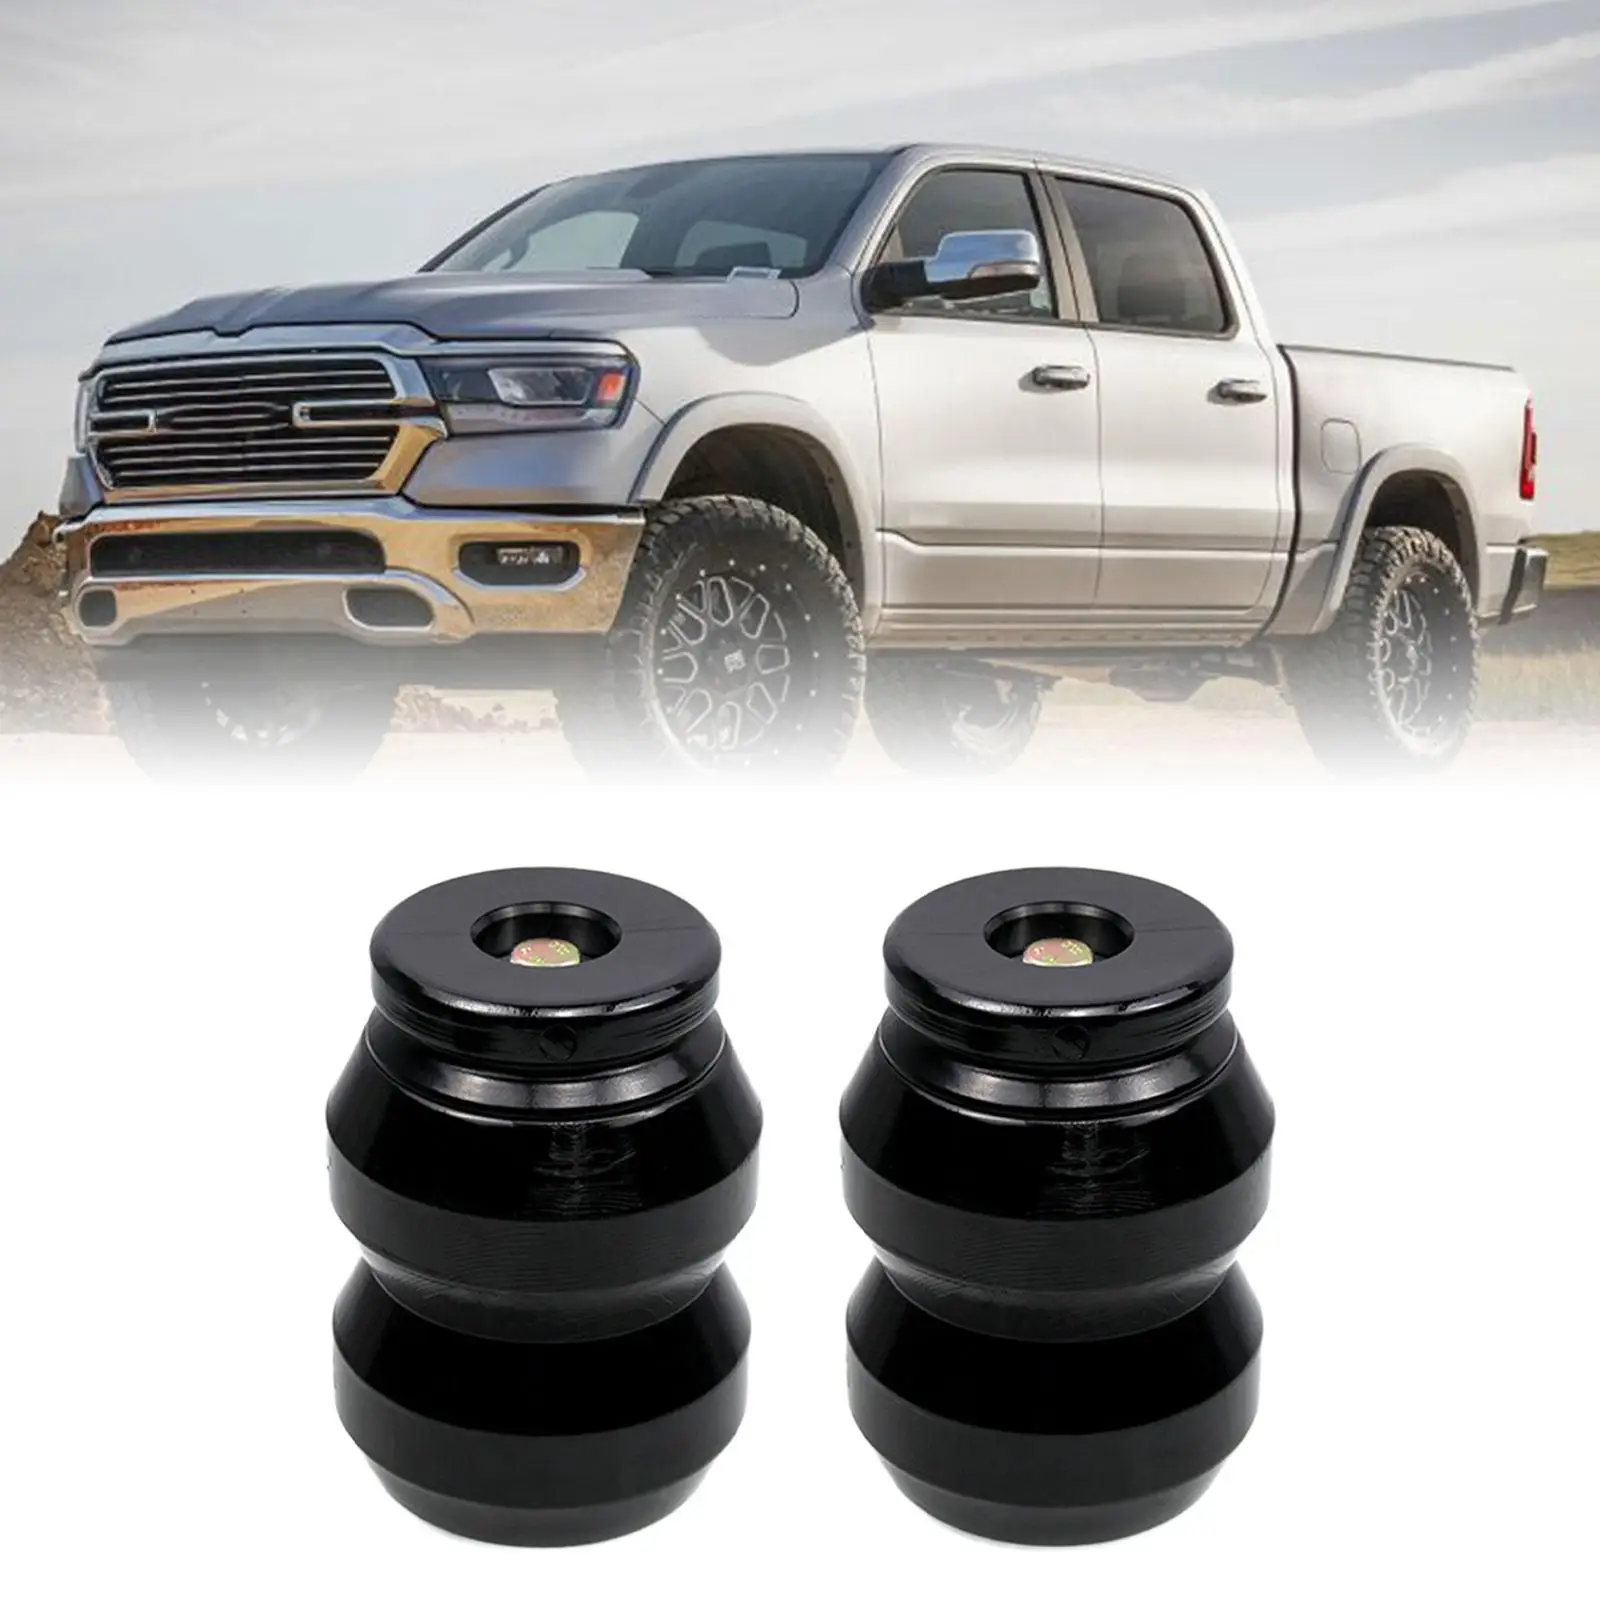 2x Suspension Enhancement System DR1500dq Replace Easy to Install High Quality for Dodge RAM 1500 2009-2021 Accessories